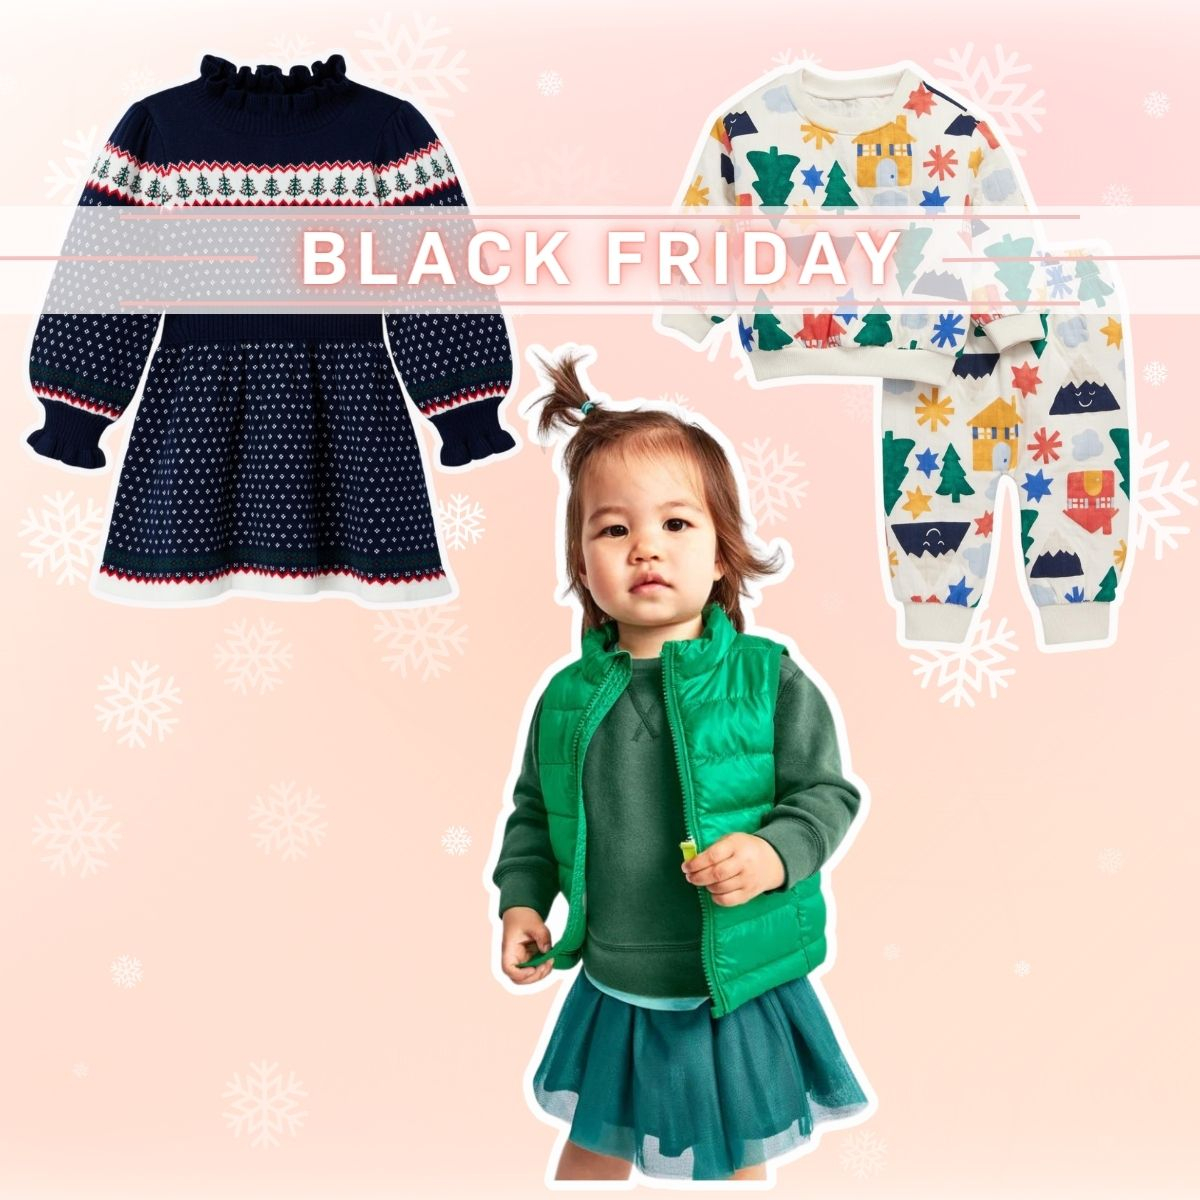 Carter's Black Friday Sale! $6 Matching Family Pajamas + Free Shipping -  The Freebie Guy: Freebies, Penny Shopping, Deals, & Giveaways